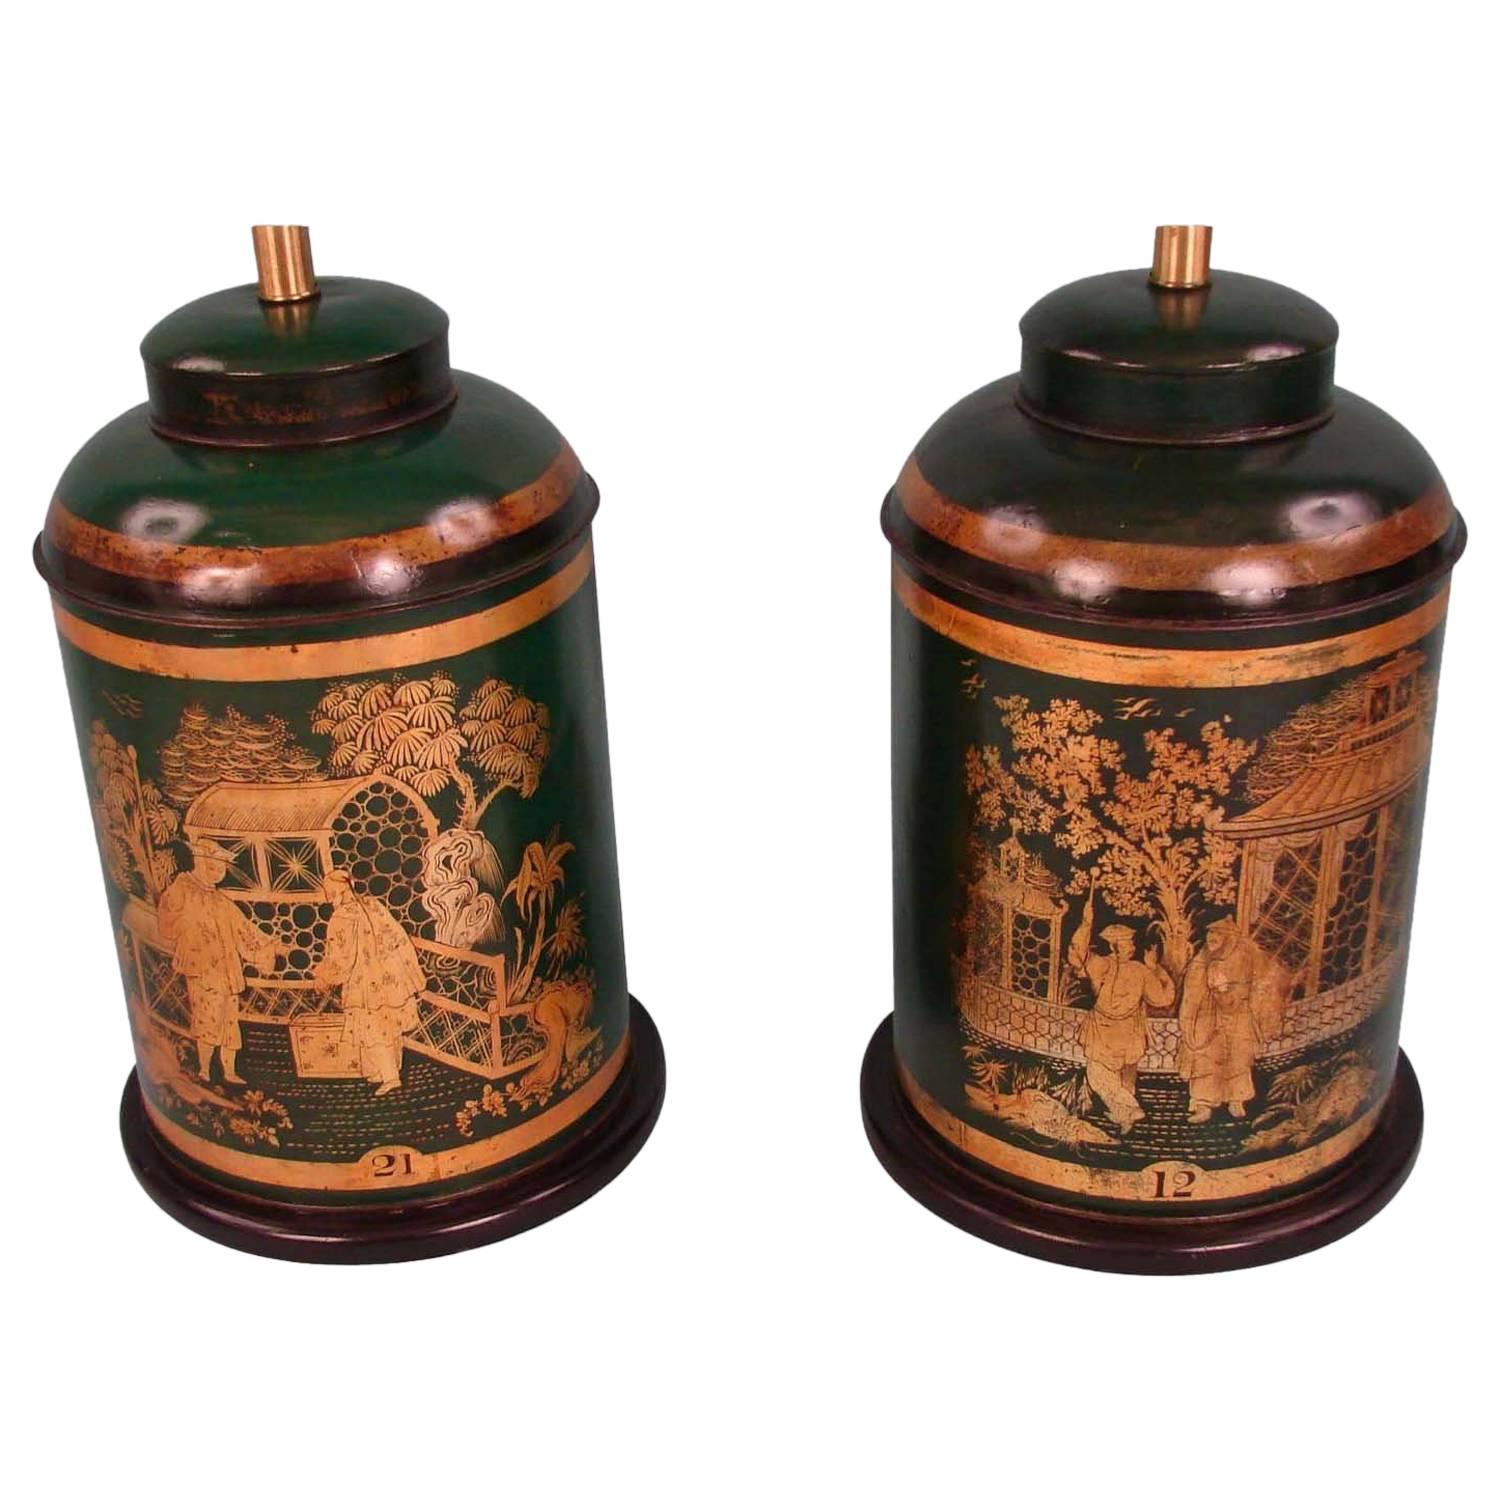 Pair of Green and Gold Chinese Export Tea Canister Lamps